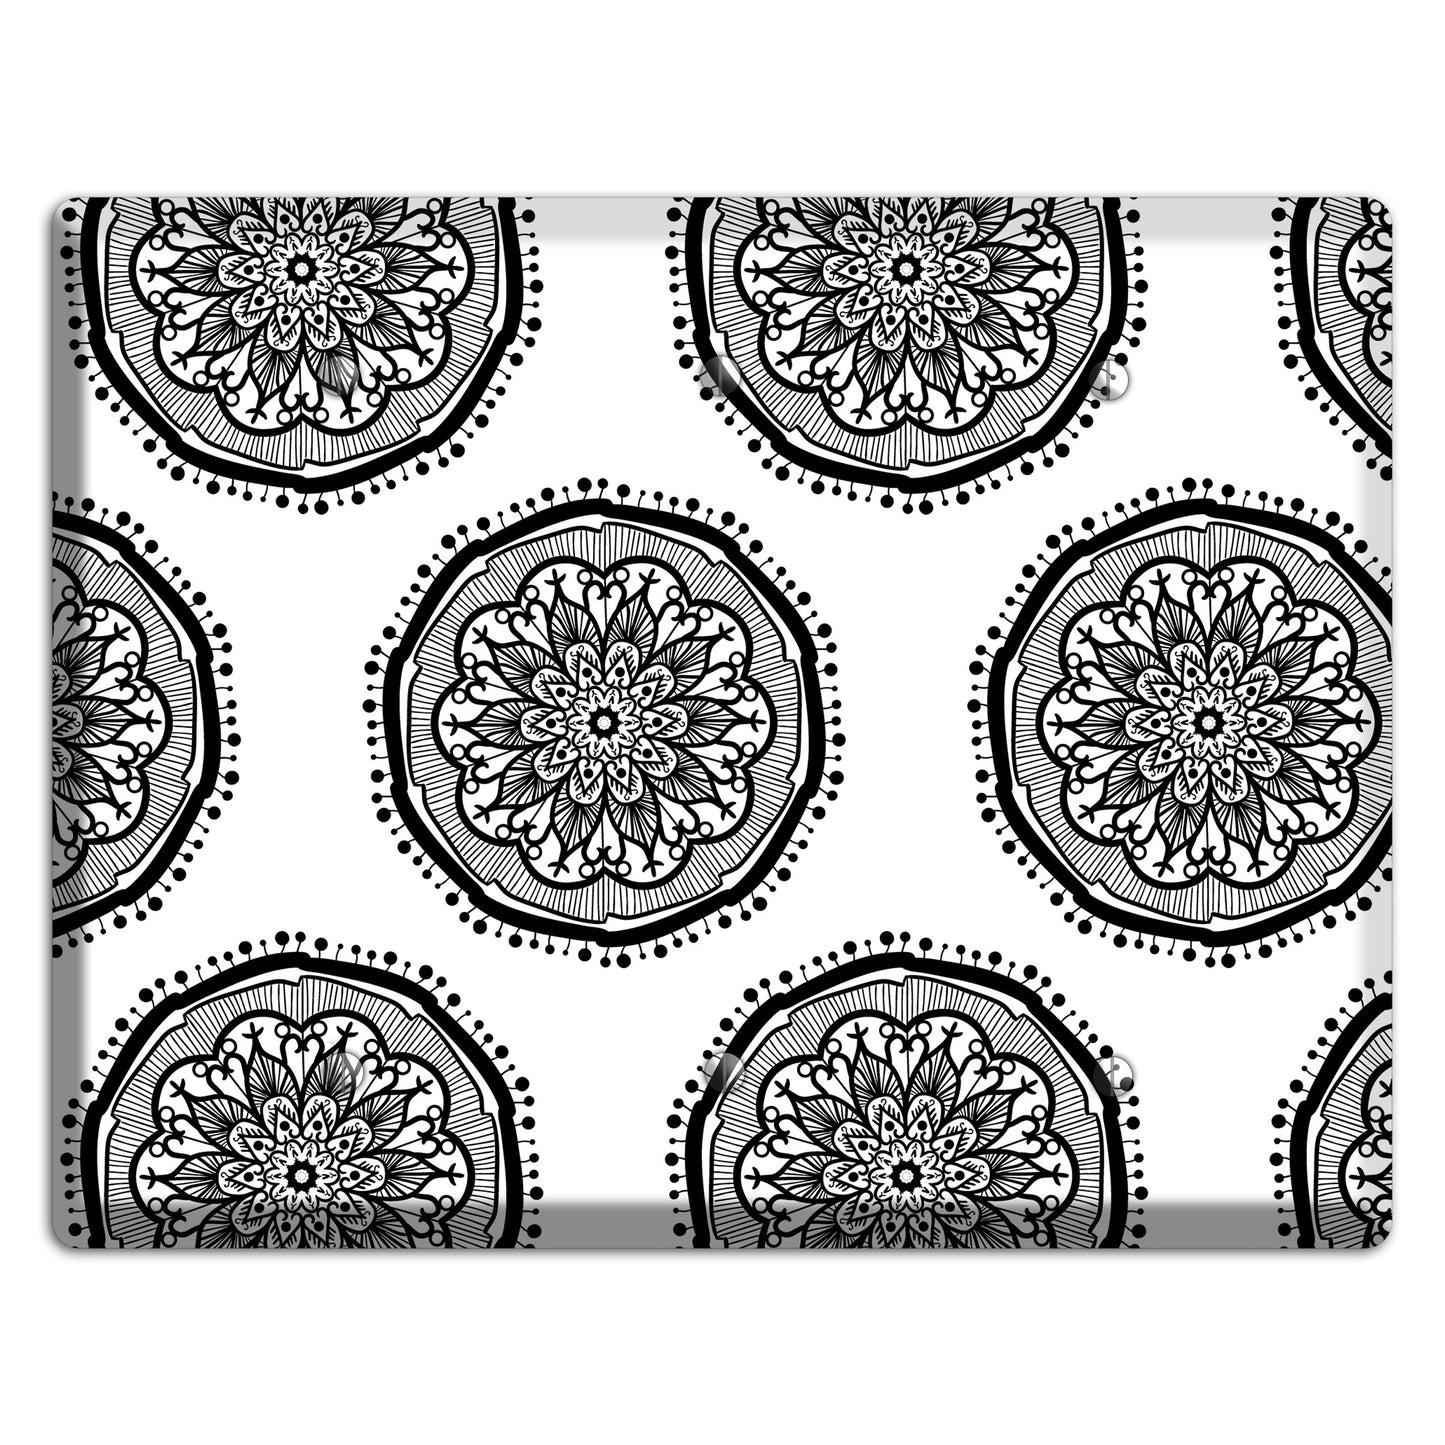 Mandala Black and White Style R Cover Plates 3 Blank Wallplate